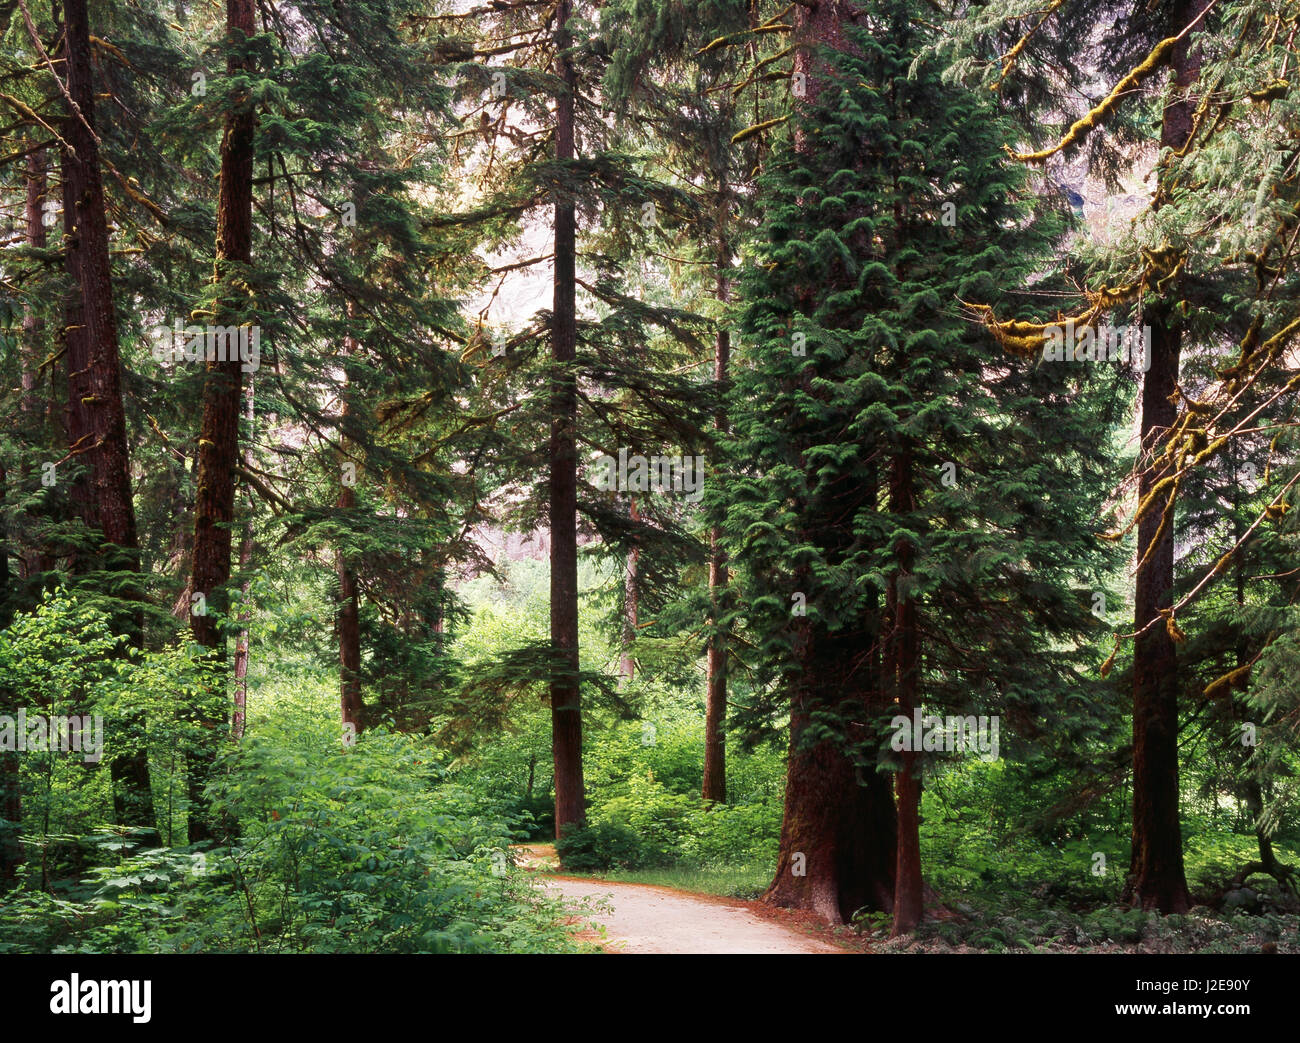 Canada, British Columbia, Sitka spruce forest at Exchamsiks River Provincial Park (Large format sizes available) Credit as: Mike Grandmaison / Jaynes Gallery / DanitaDelimont.com Stock Photo